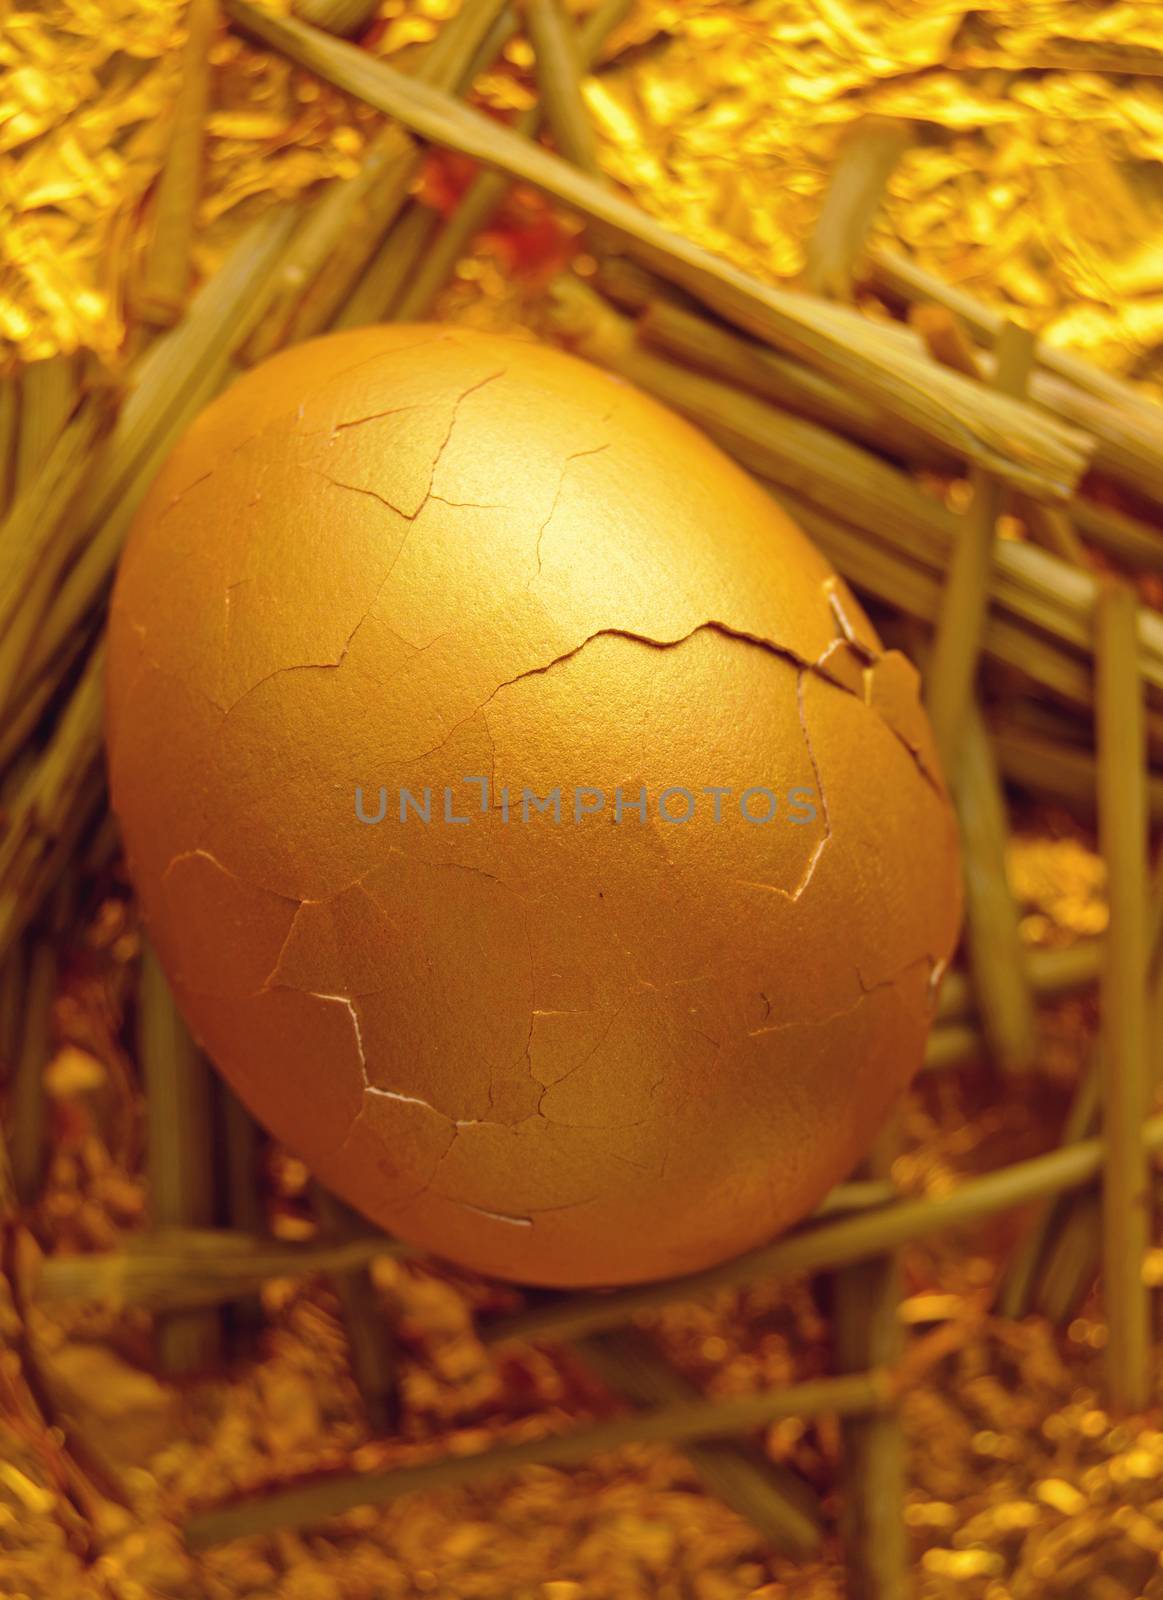 Gold nest egg about to hatch